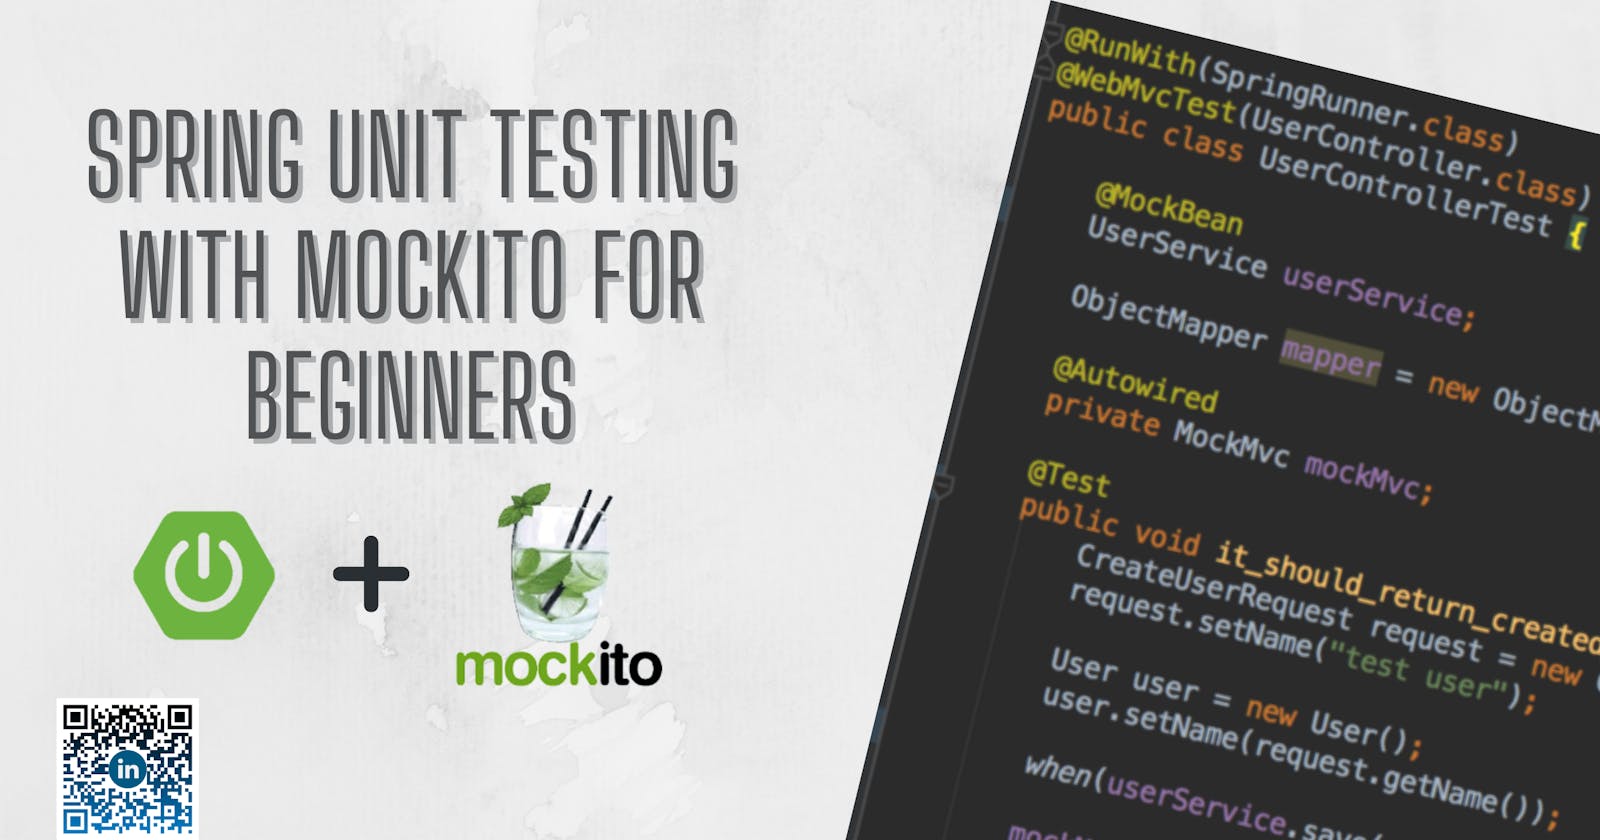 Spring Unit Testing with Mockito For Beginners